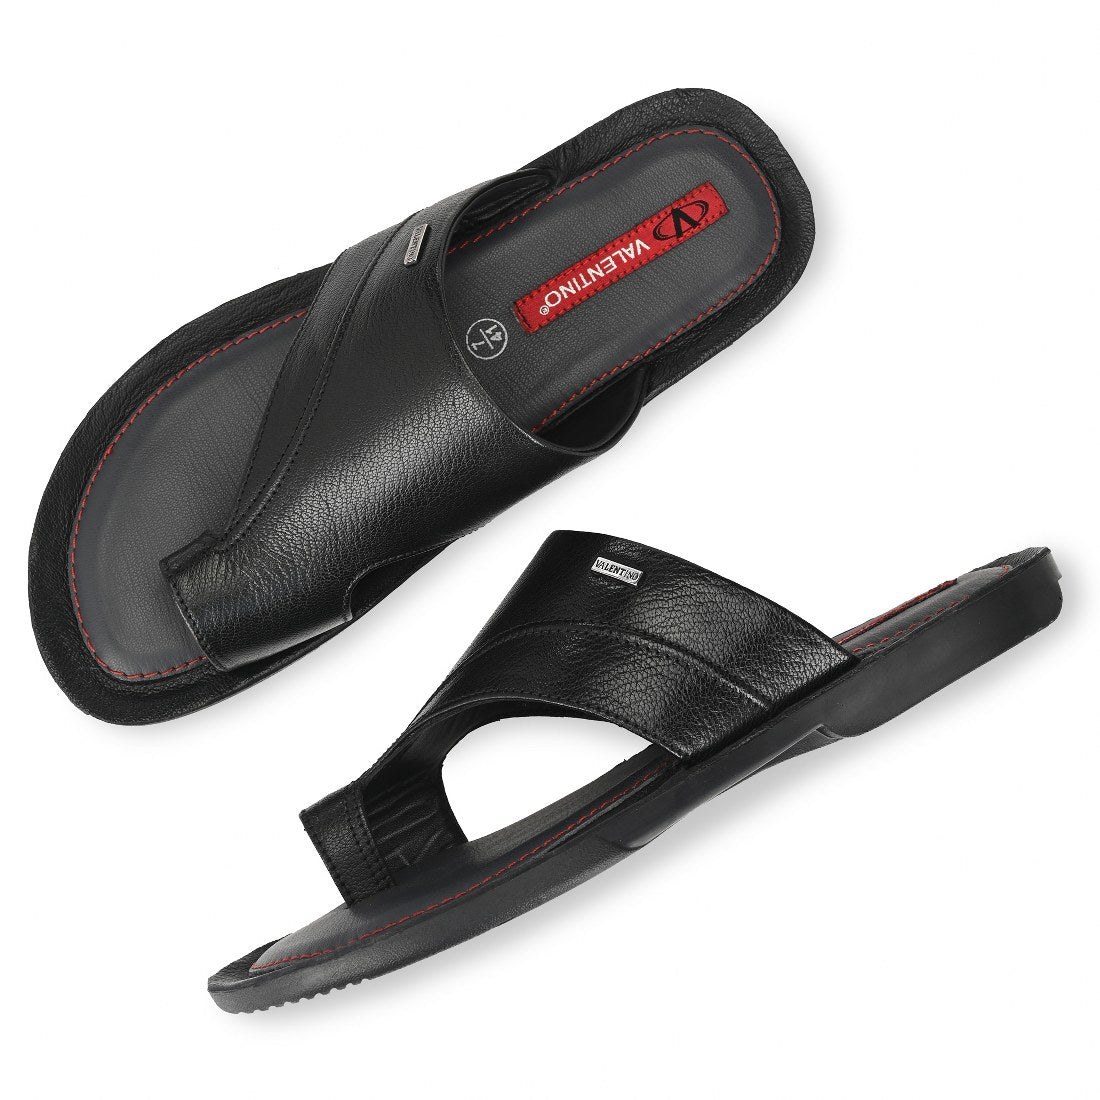 CHILL OUT-21 MEN LEATHER BLACK CASUAL SLIPPER THONG